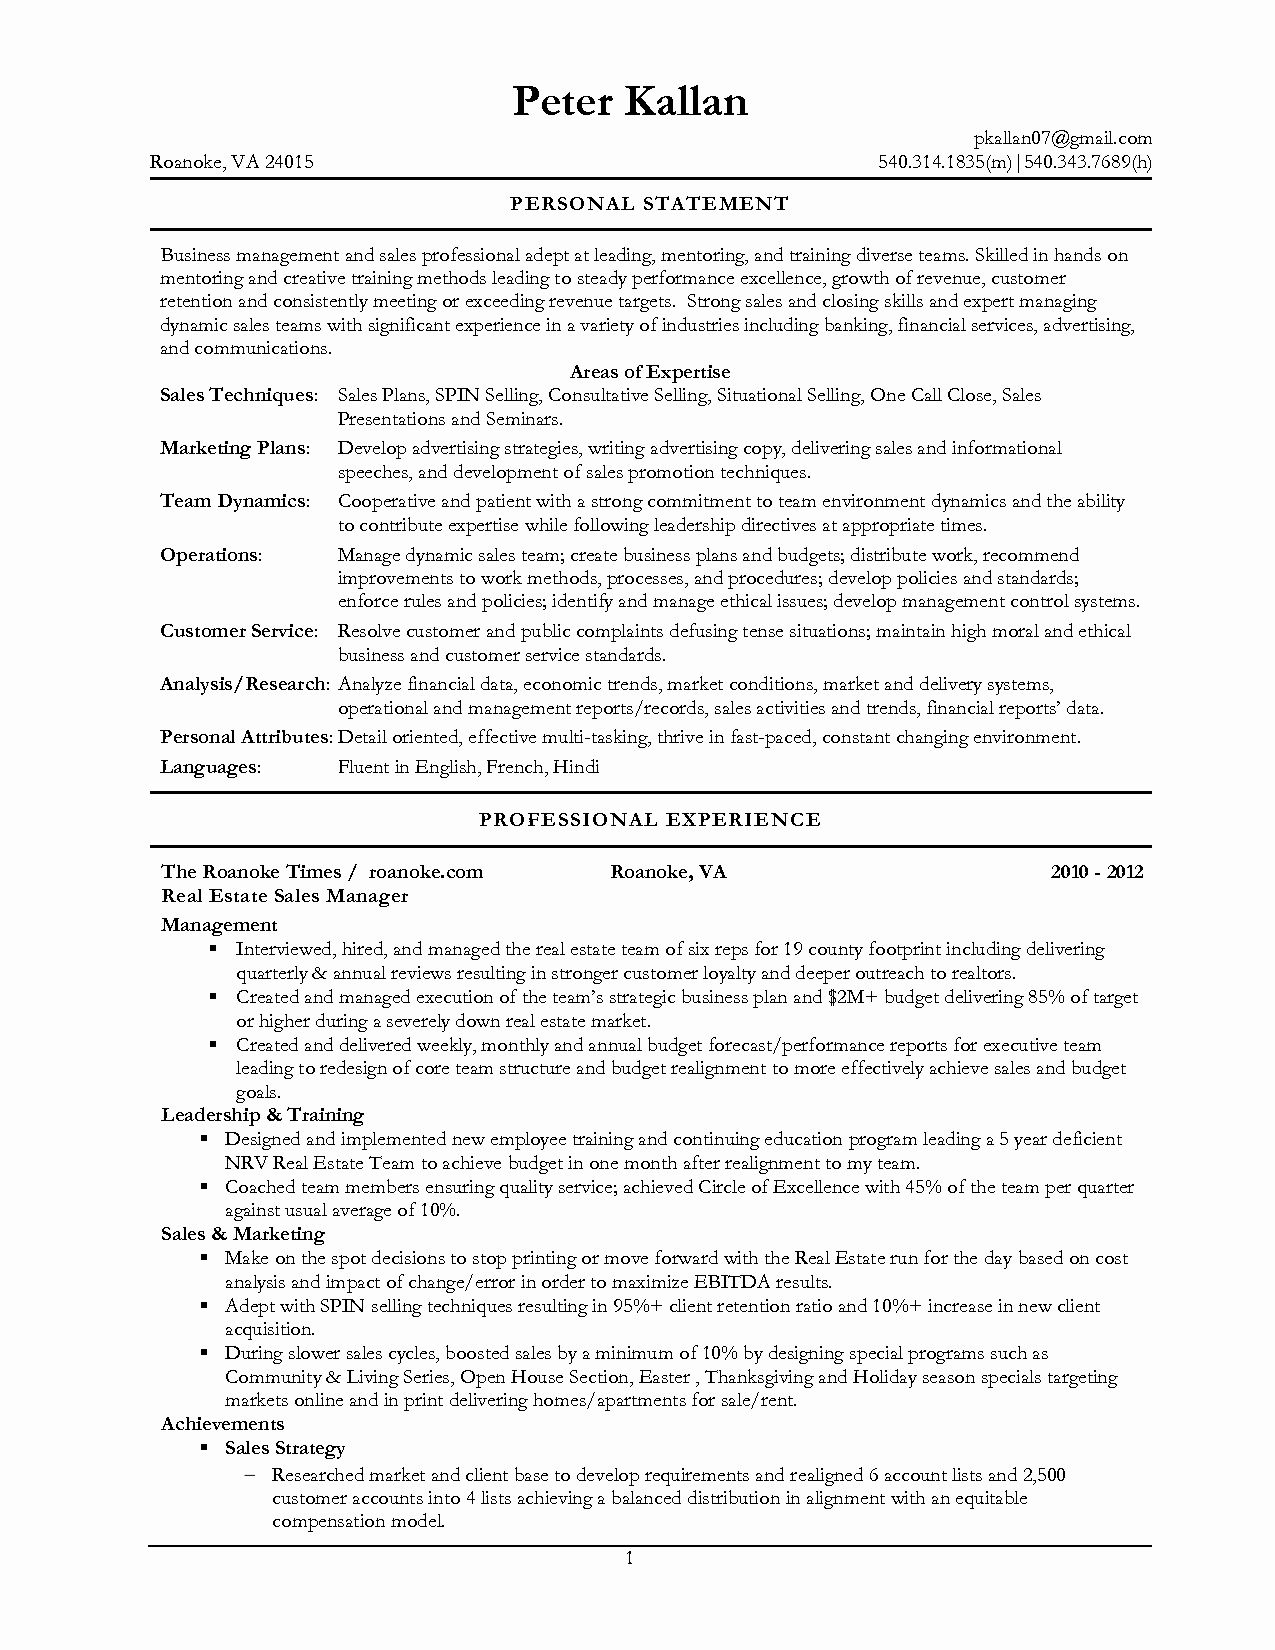 Personal Summary for Resume Resume Ideas